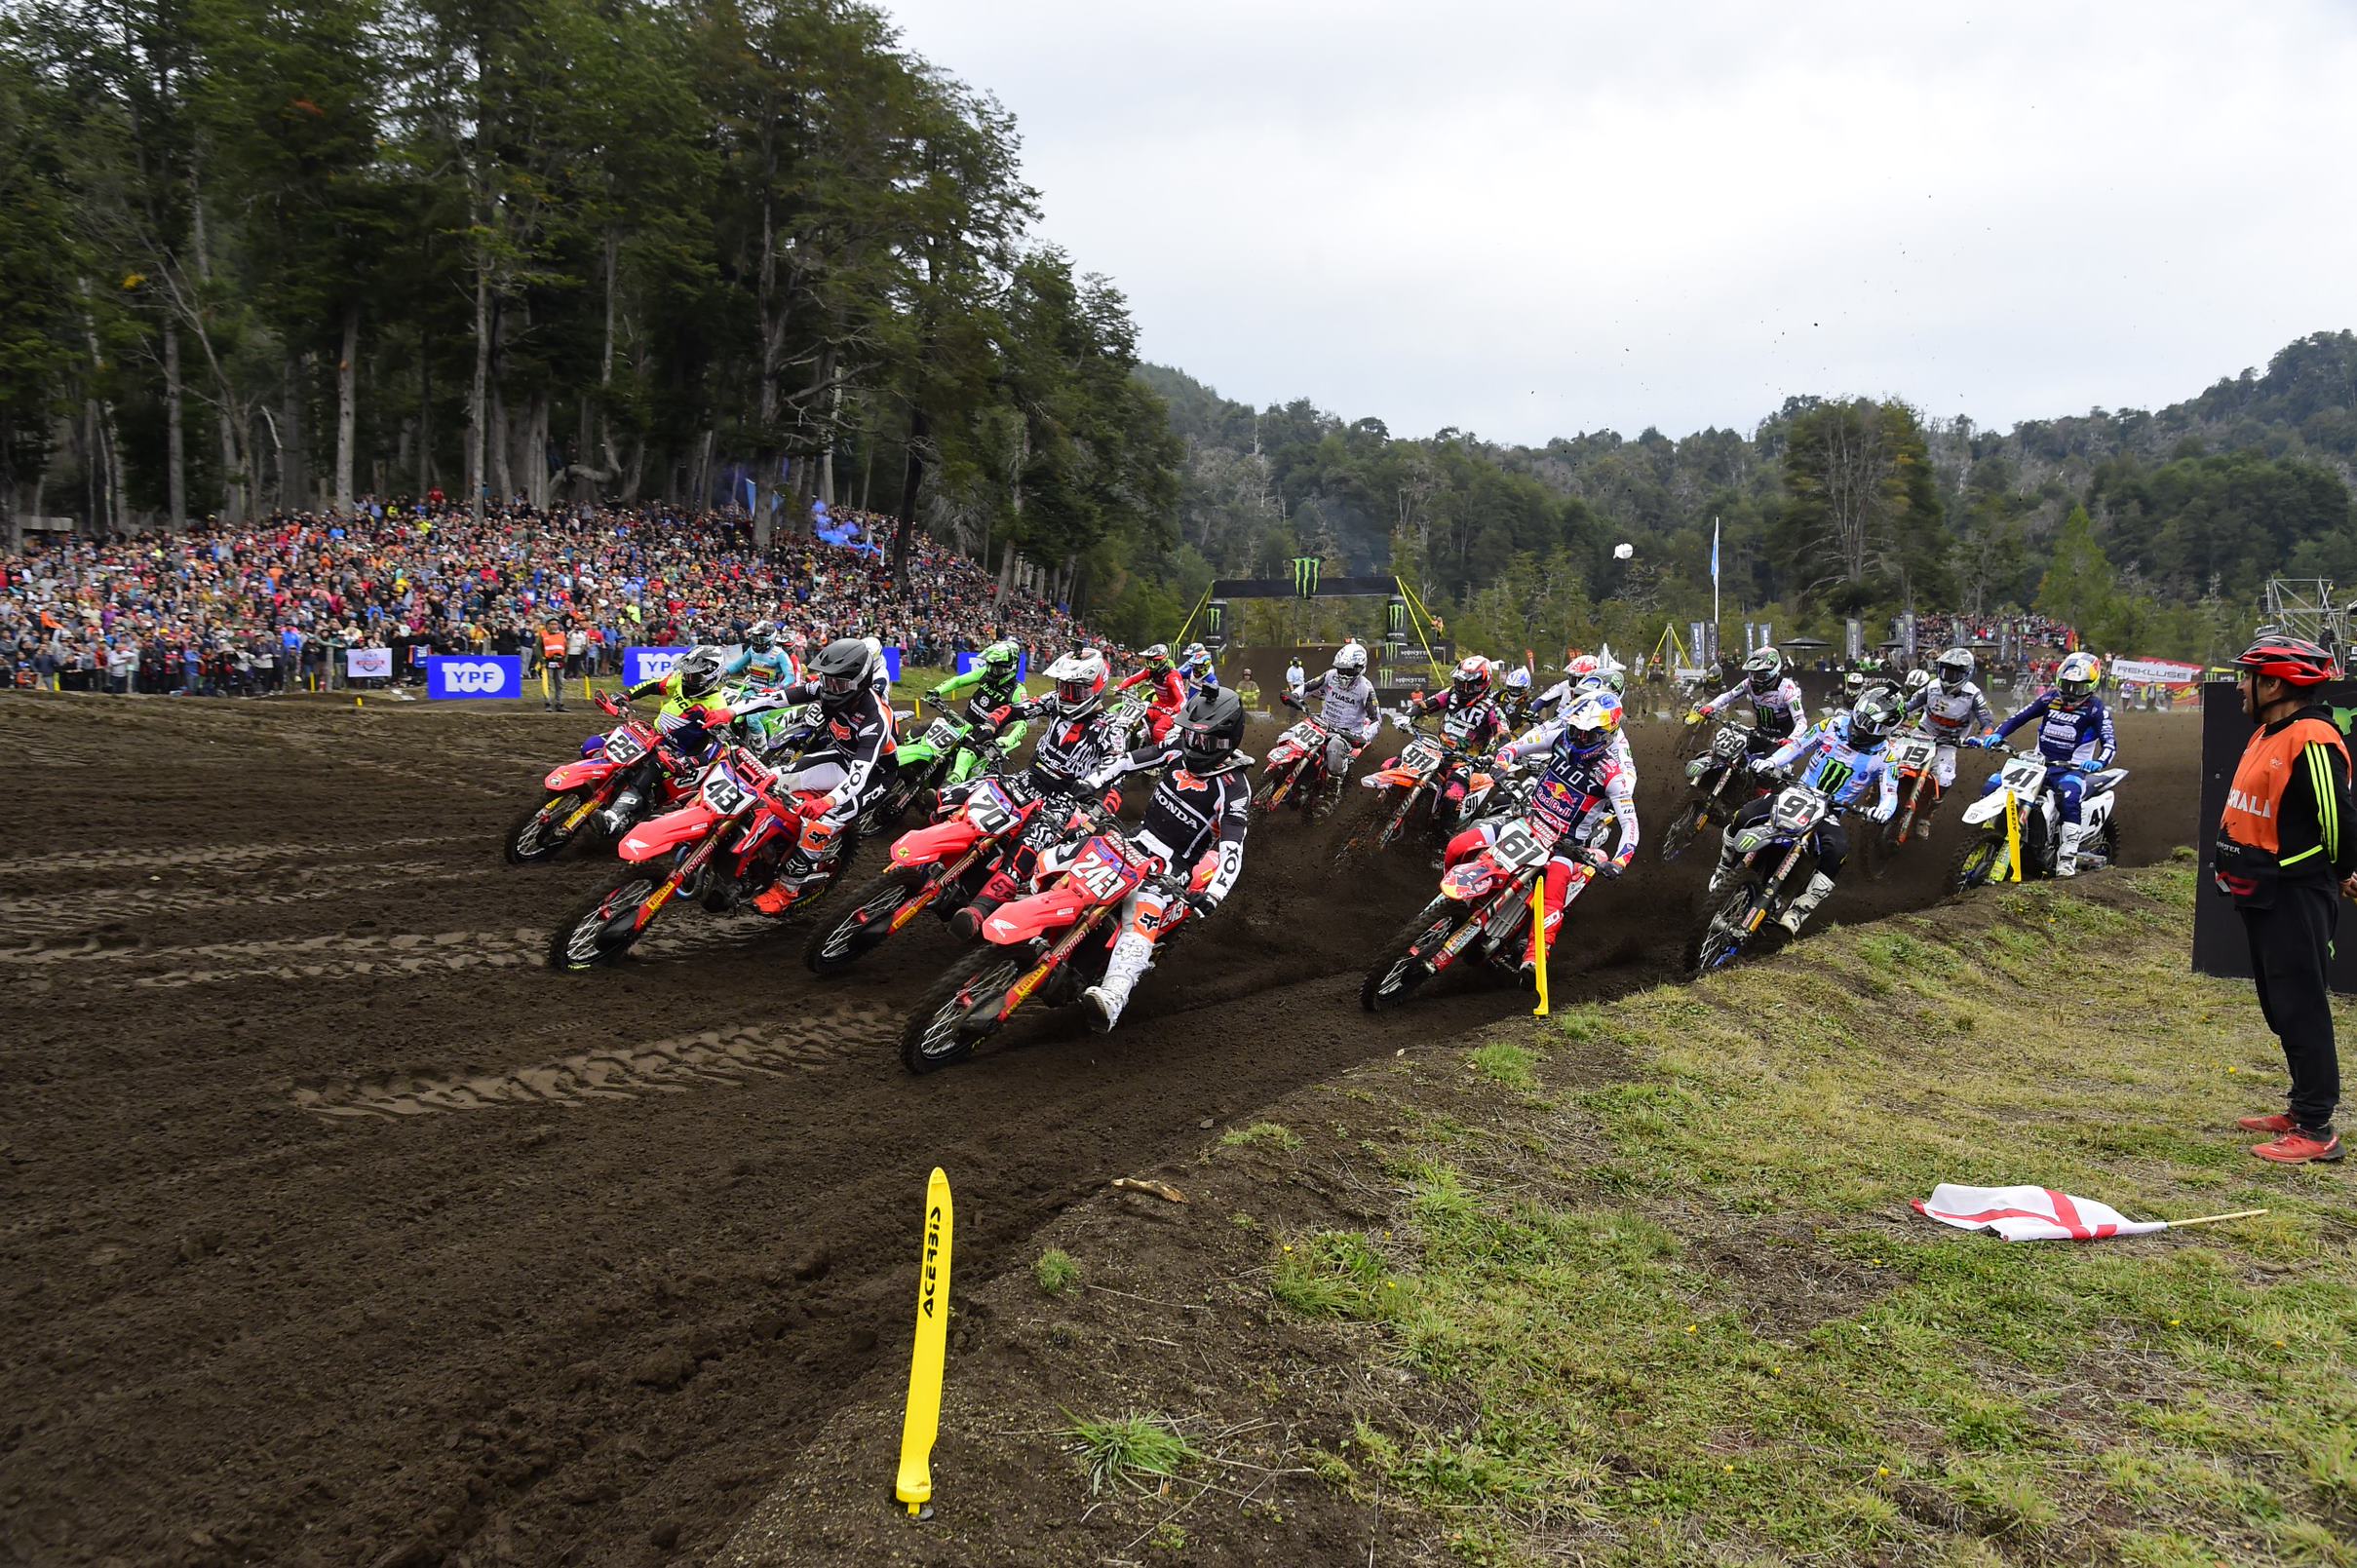 TICKETS NOW ON SALE FOR PATAGONIA – ARGENTINA MXGP